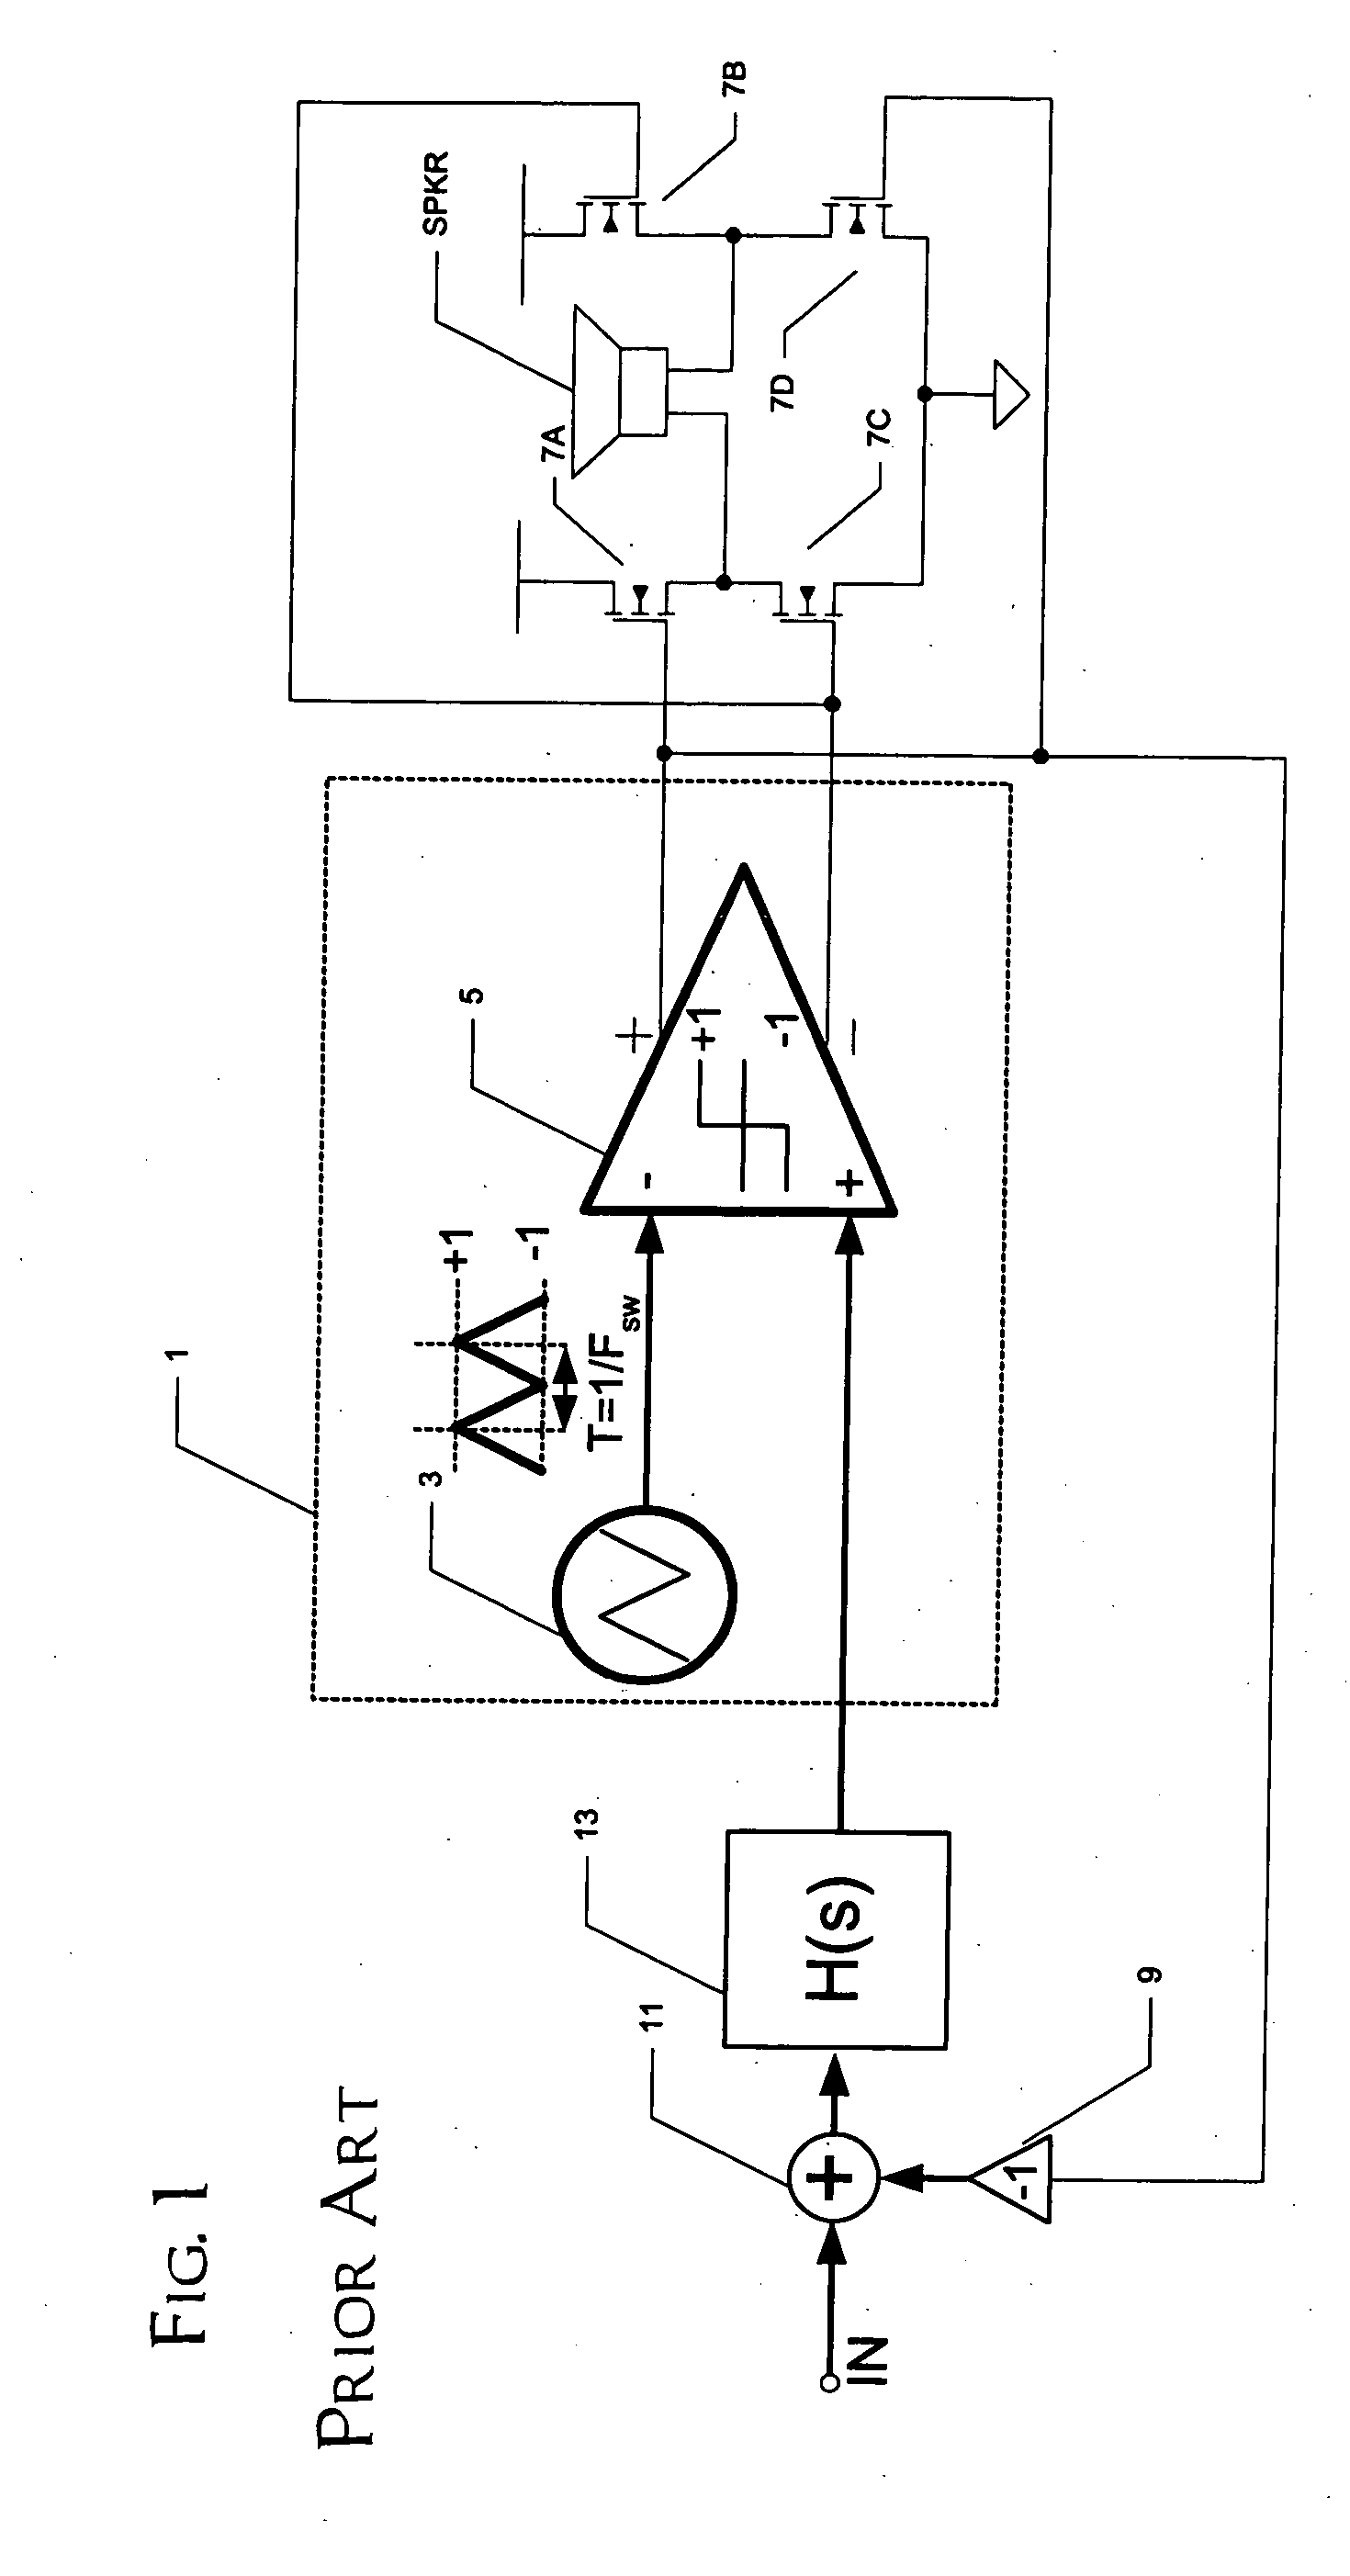 Detection of DC output levels from a class D amplifier